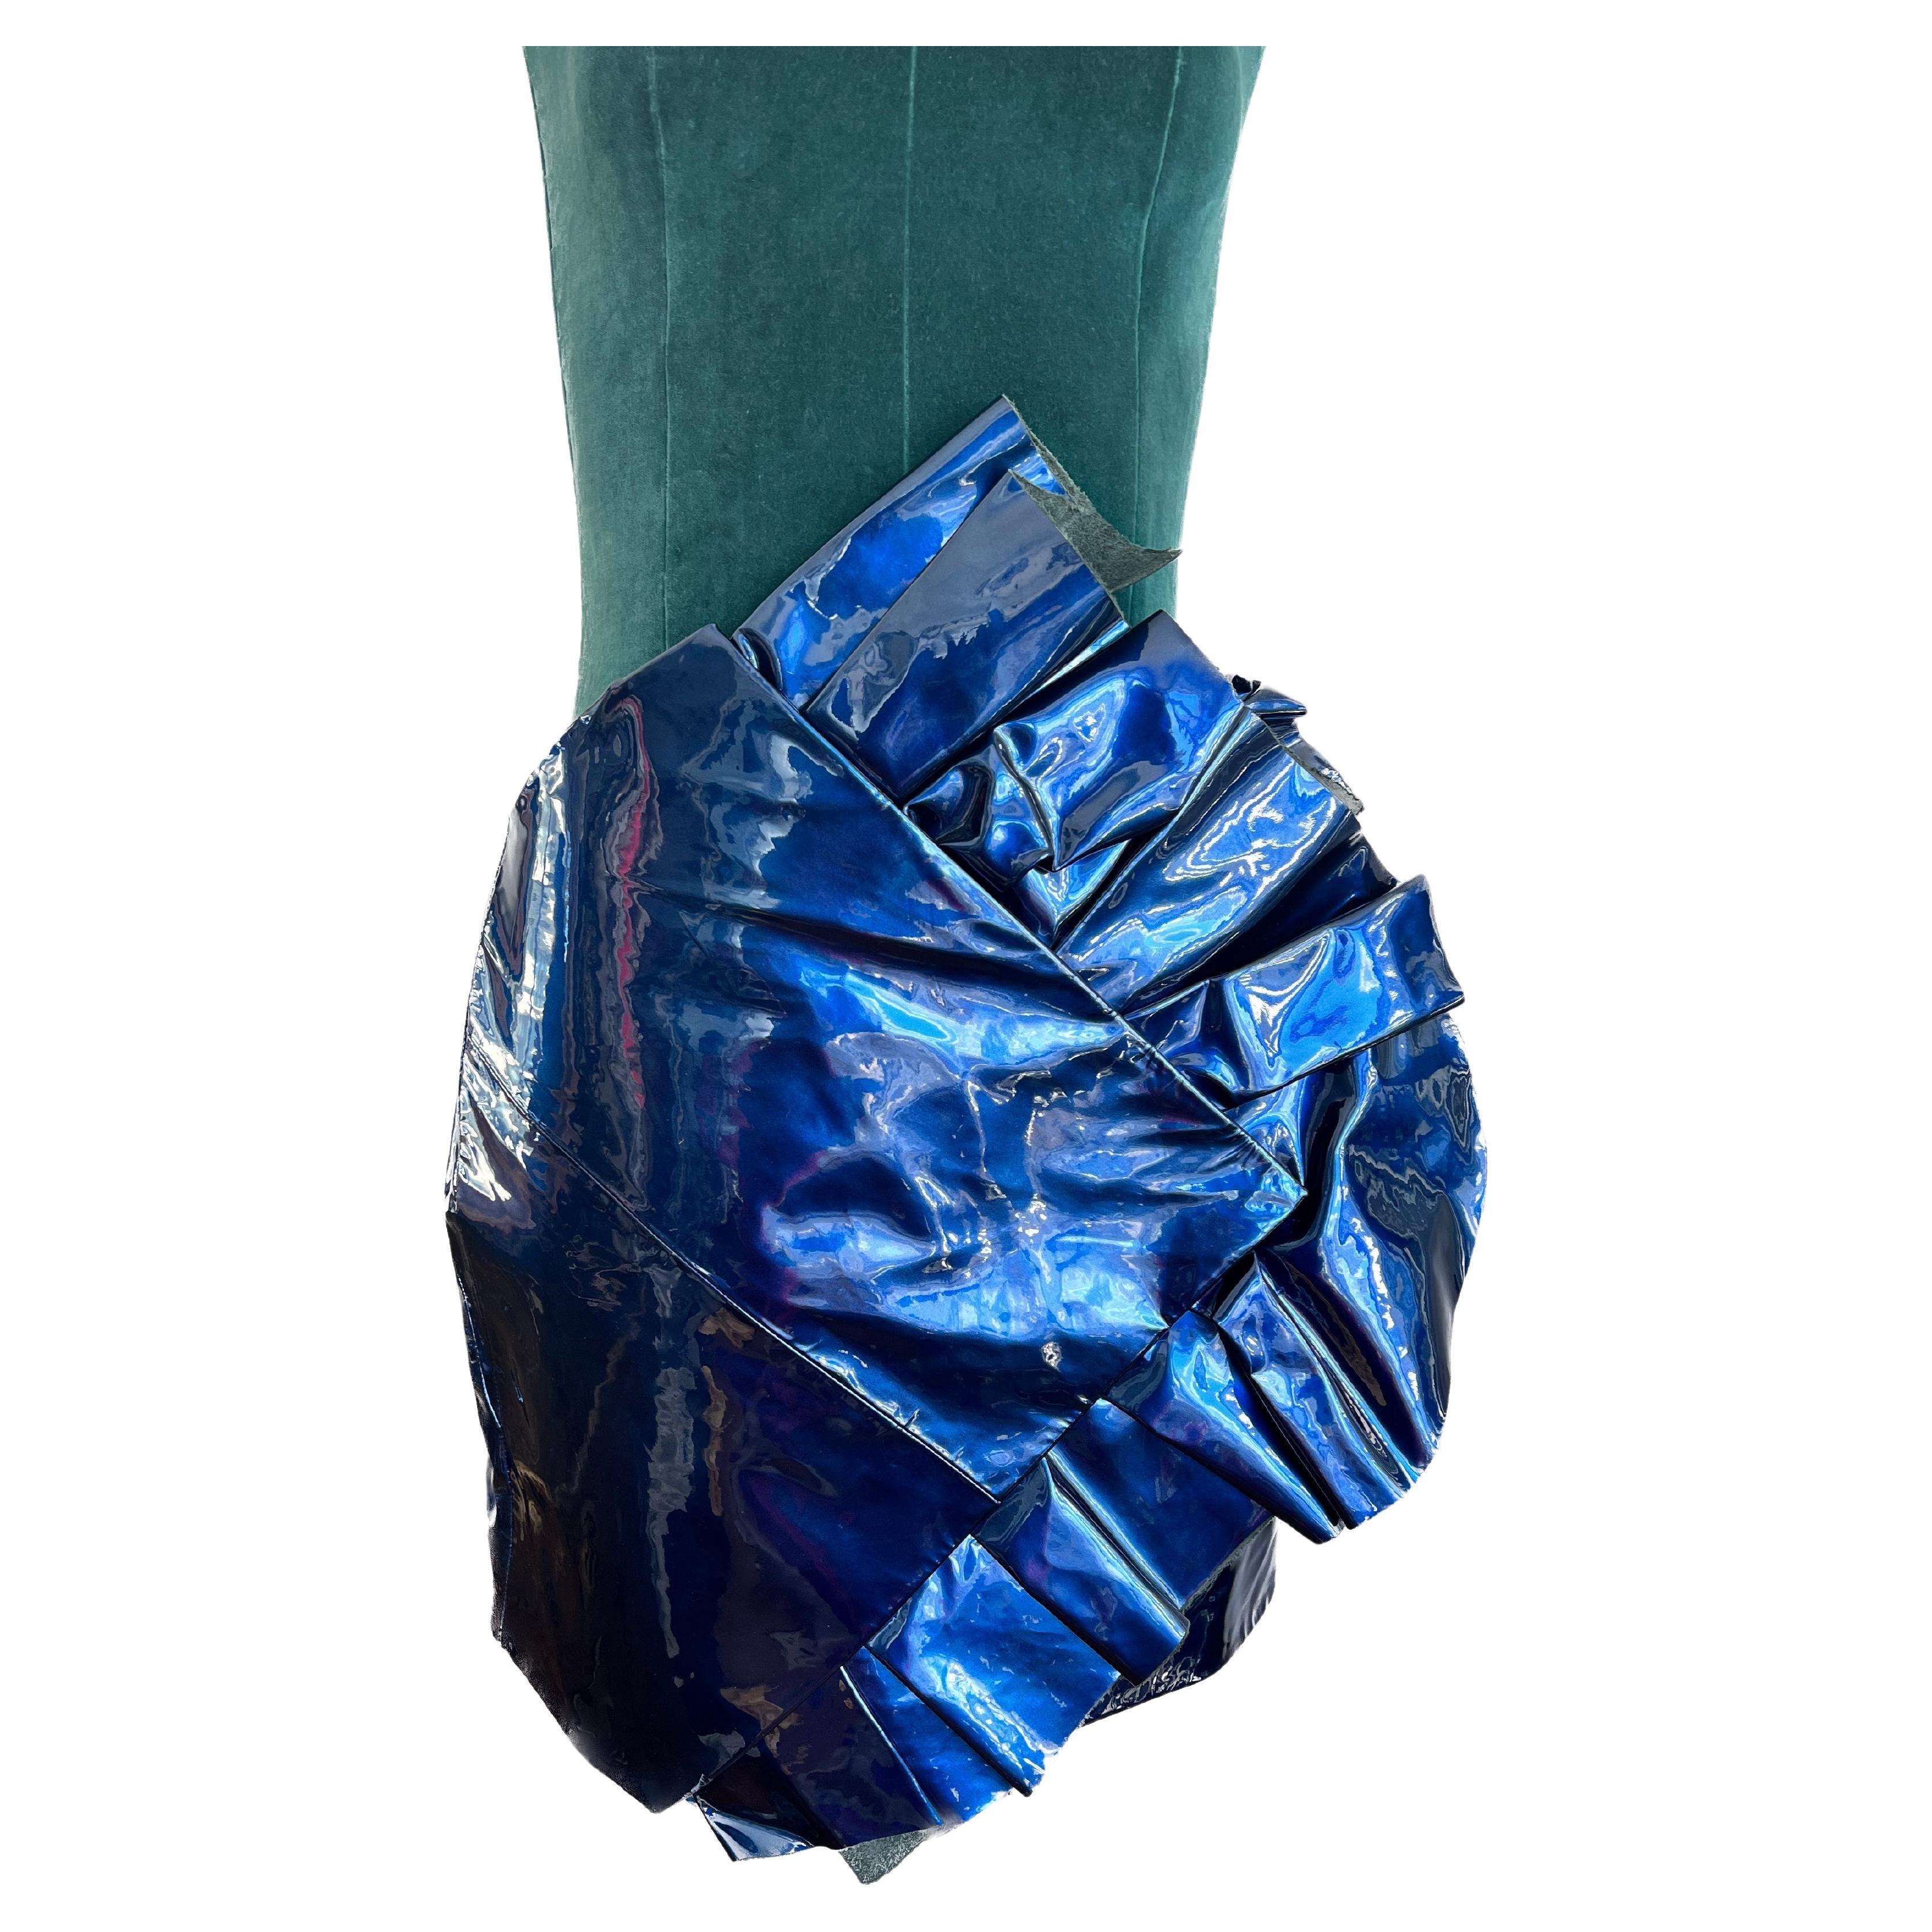 Saint Laurent 2017 Blue Paten Mini Leather Skirt with Ruffle  For Sale